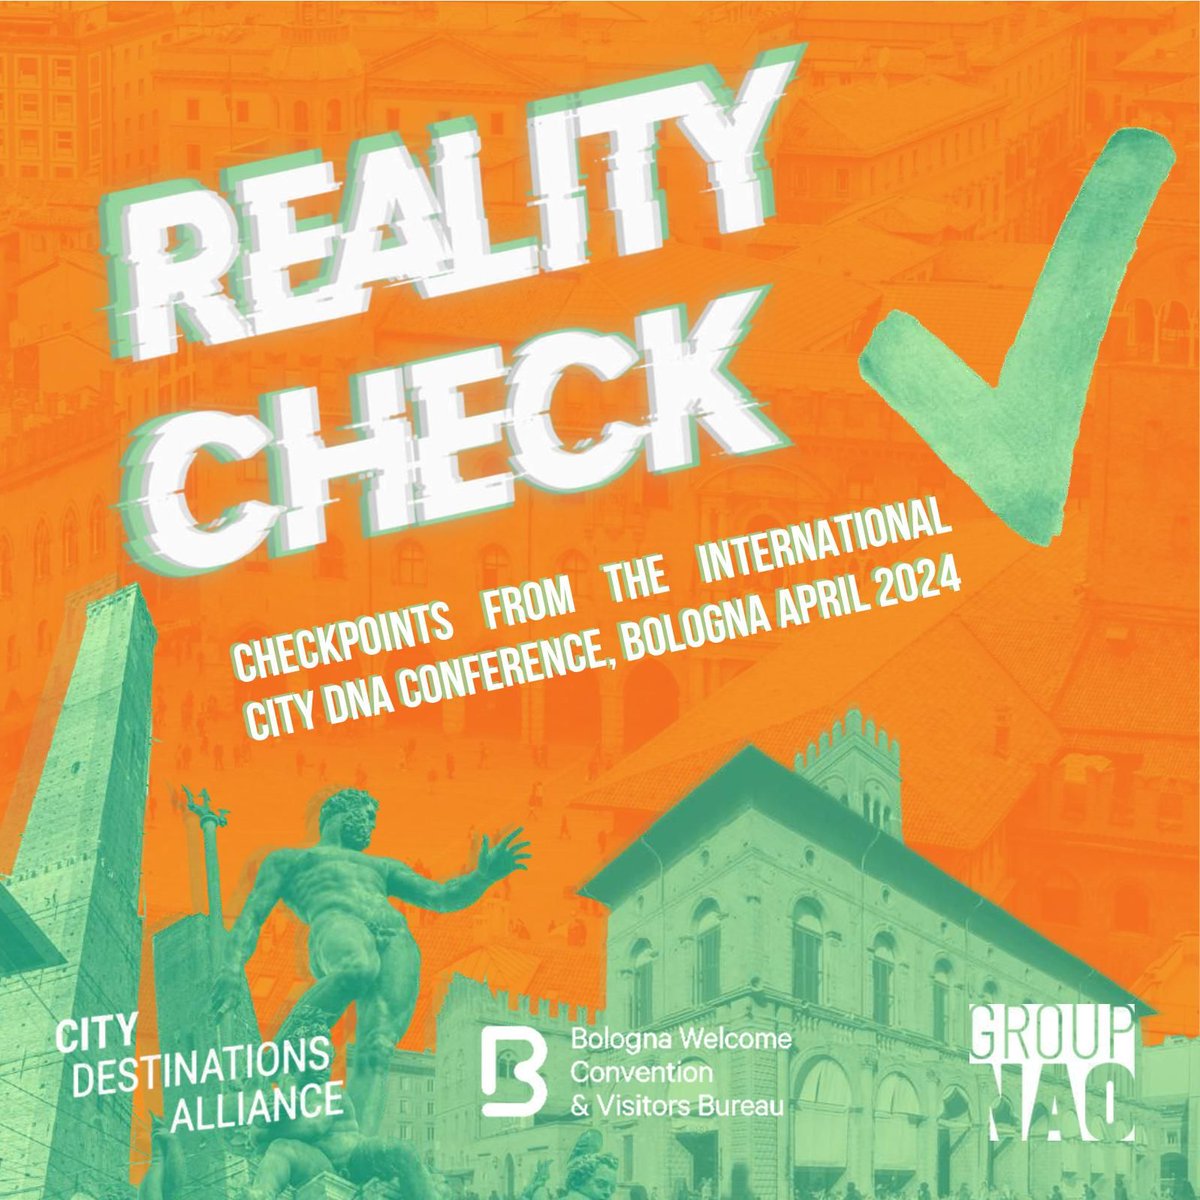 ✔️🚀🌍 Exciting revelations from the #CityDNA #RealityCheck Conference in @BolognaWelcome! 
🤖Is the future of tourism human or AI-driven?
🌱Sustainability: Are we walking the walk or just talking the talk?
Check the full recap: buff.ly/3y80rSC 
@group_nao